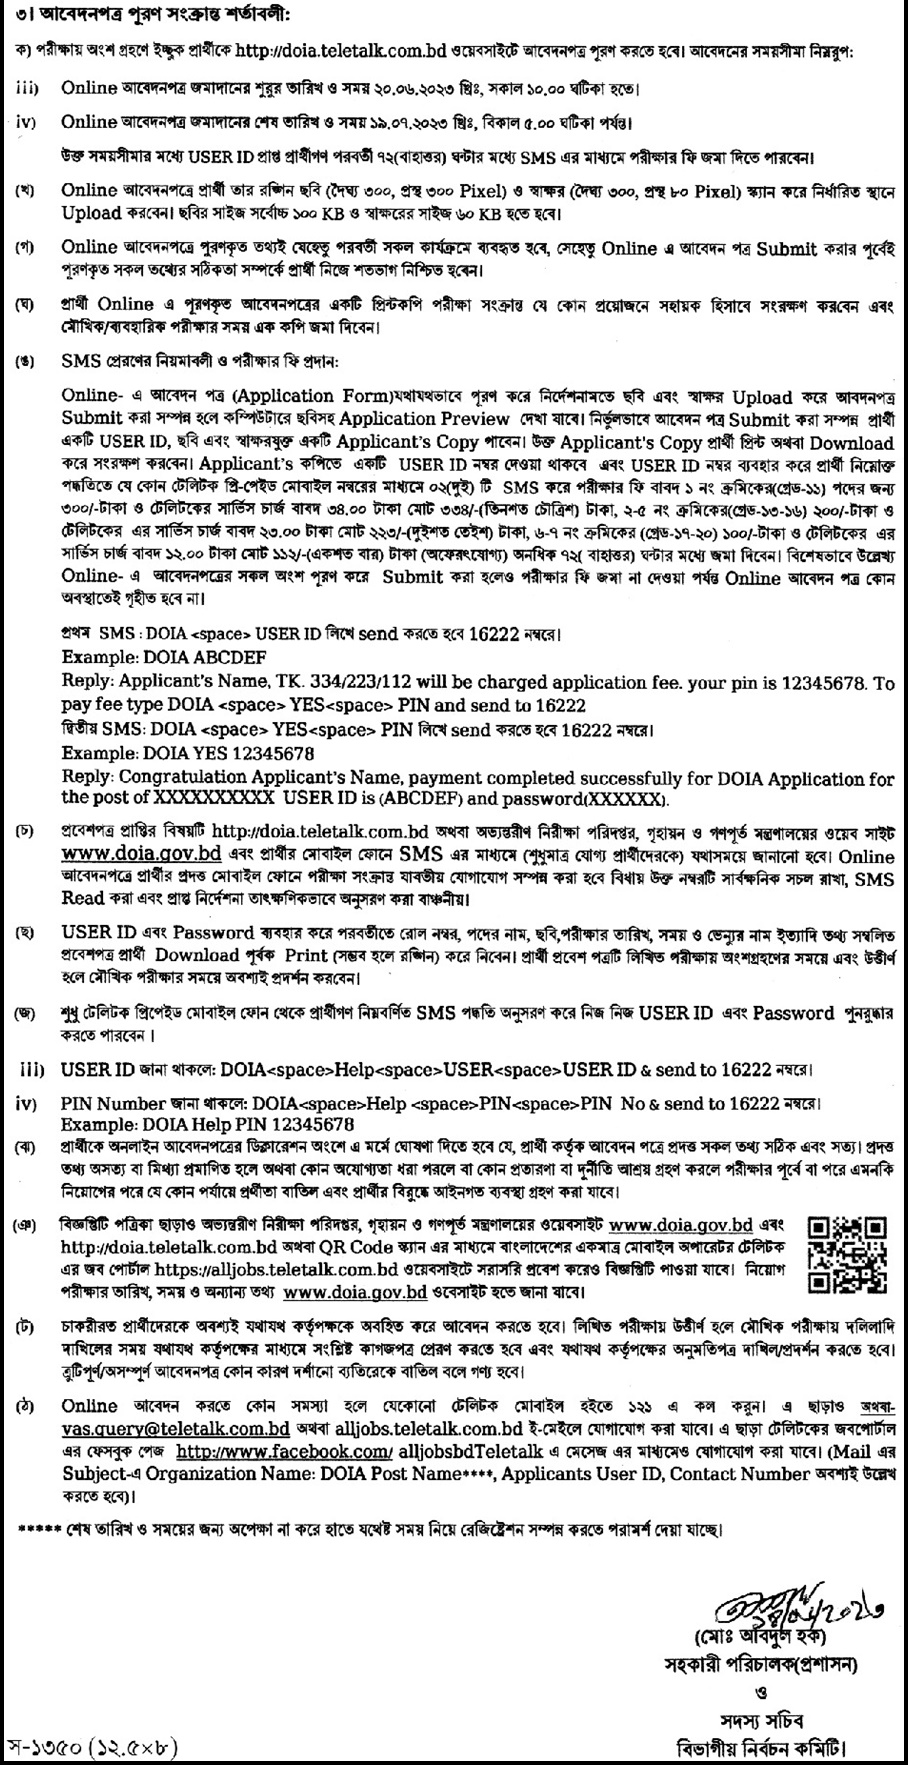 Ministry Of Housing And Public Works Job Circular